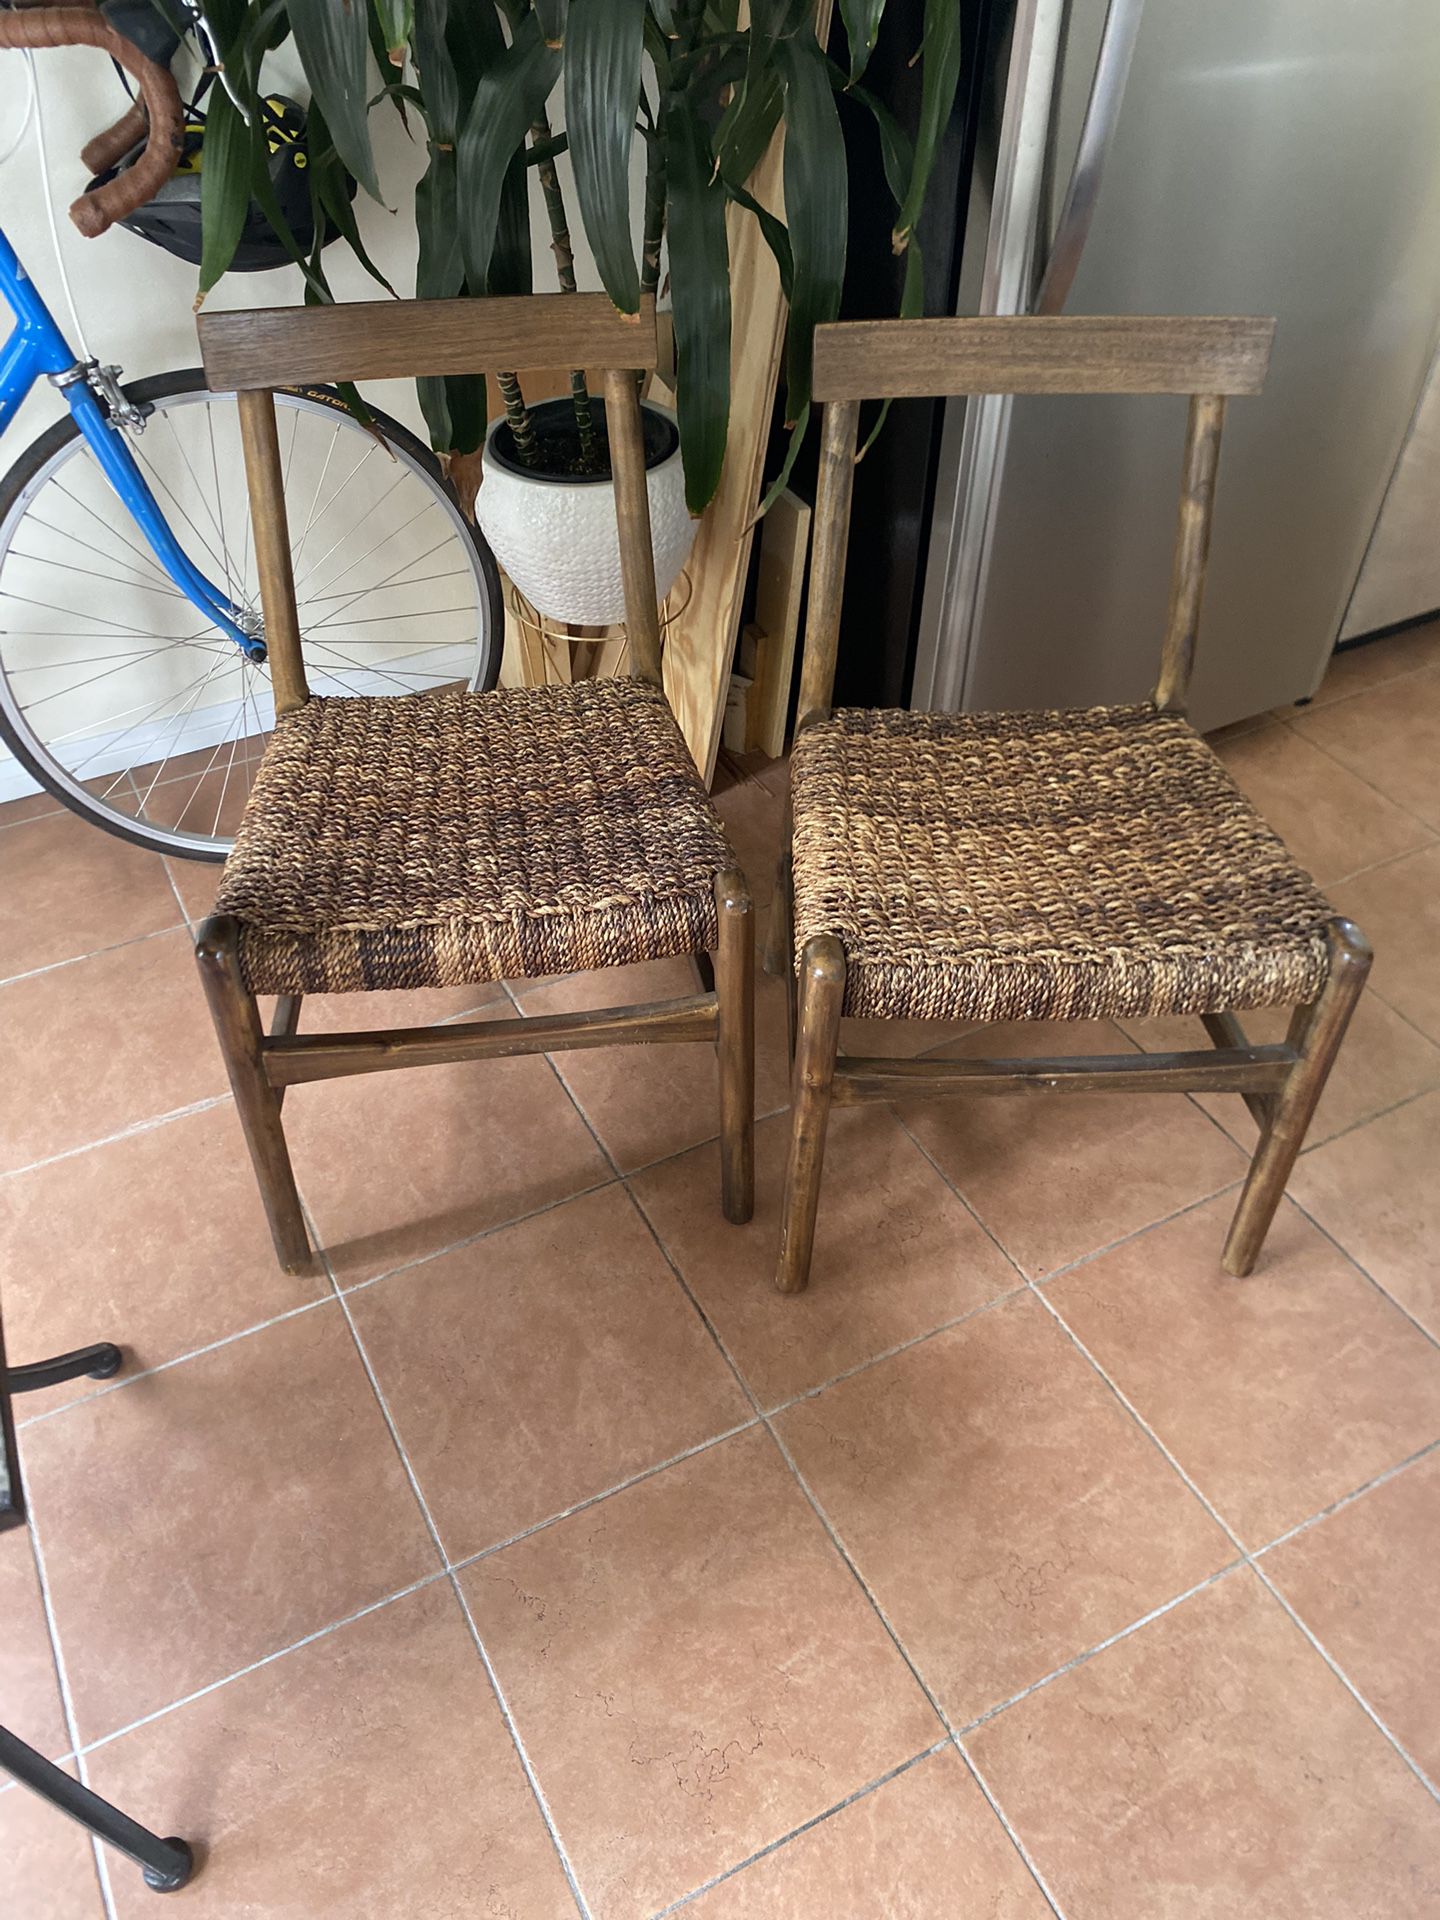 Chairs (2)